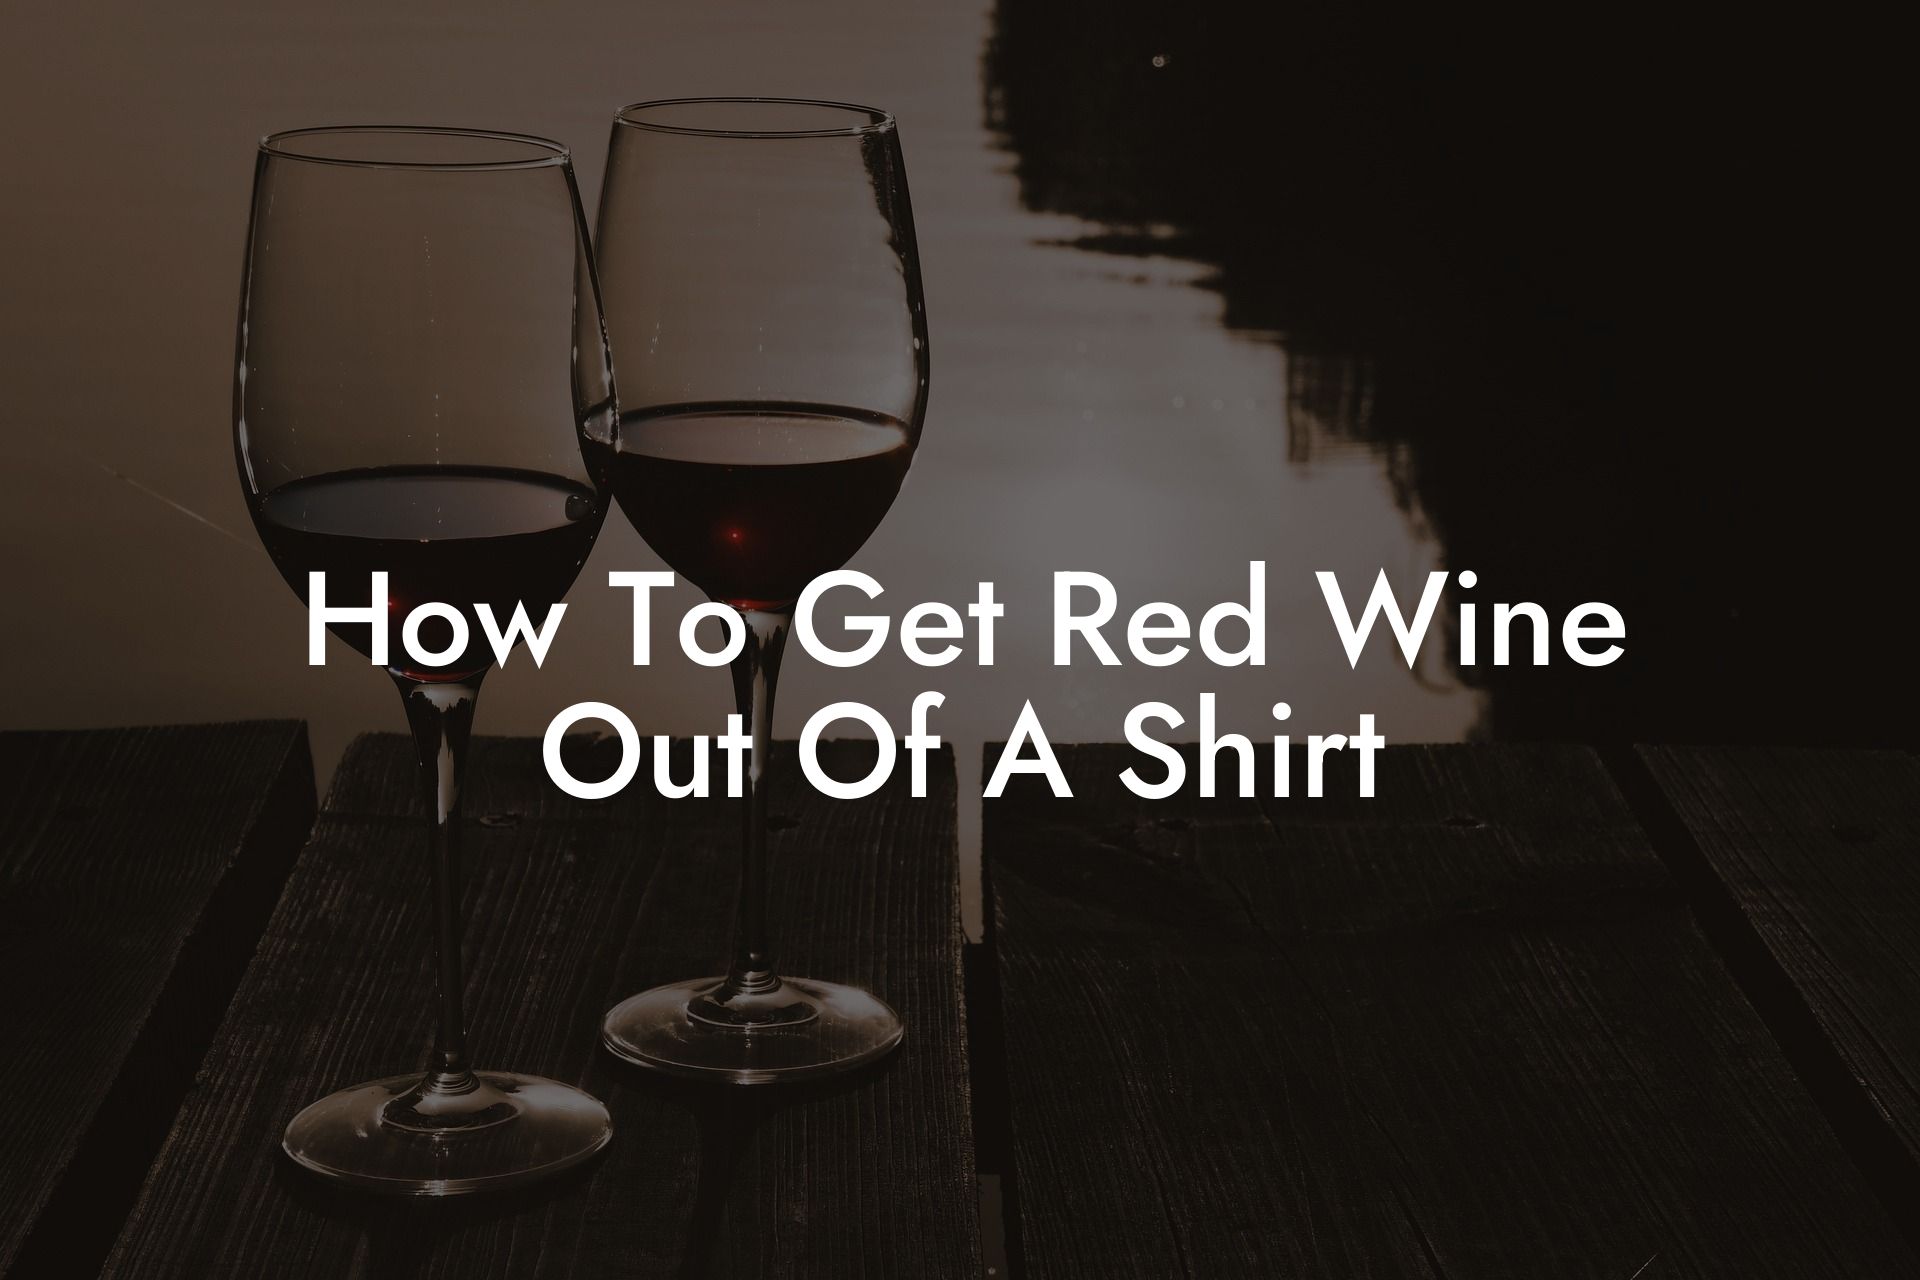 How To Get Red Wine Out Of A Shirt